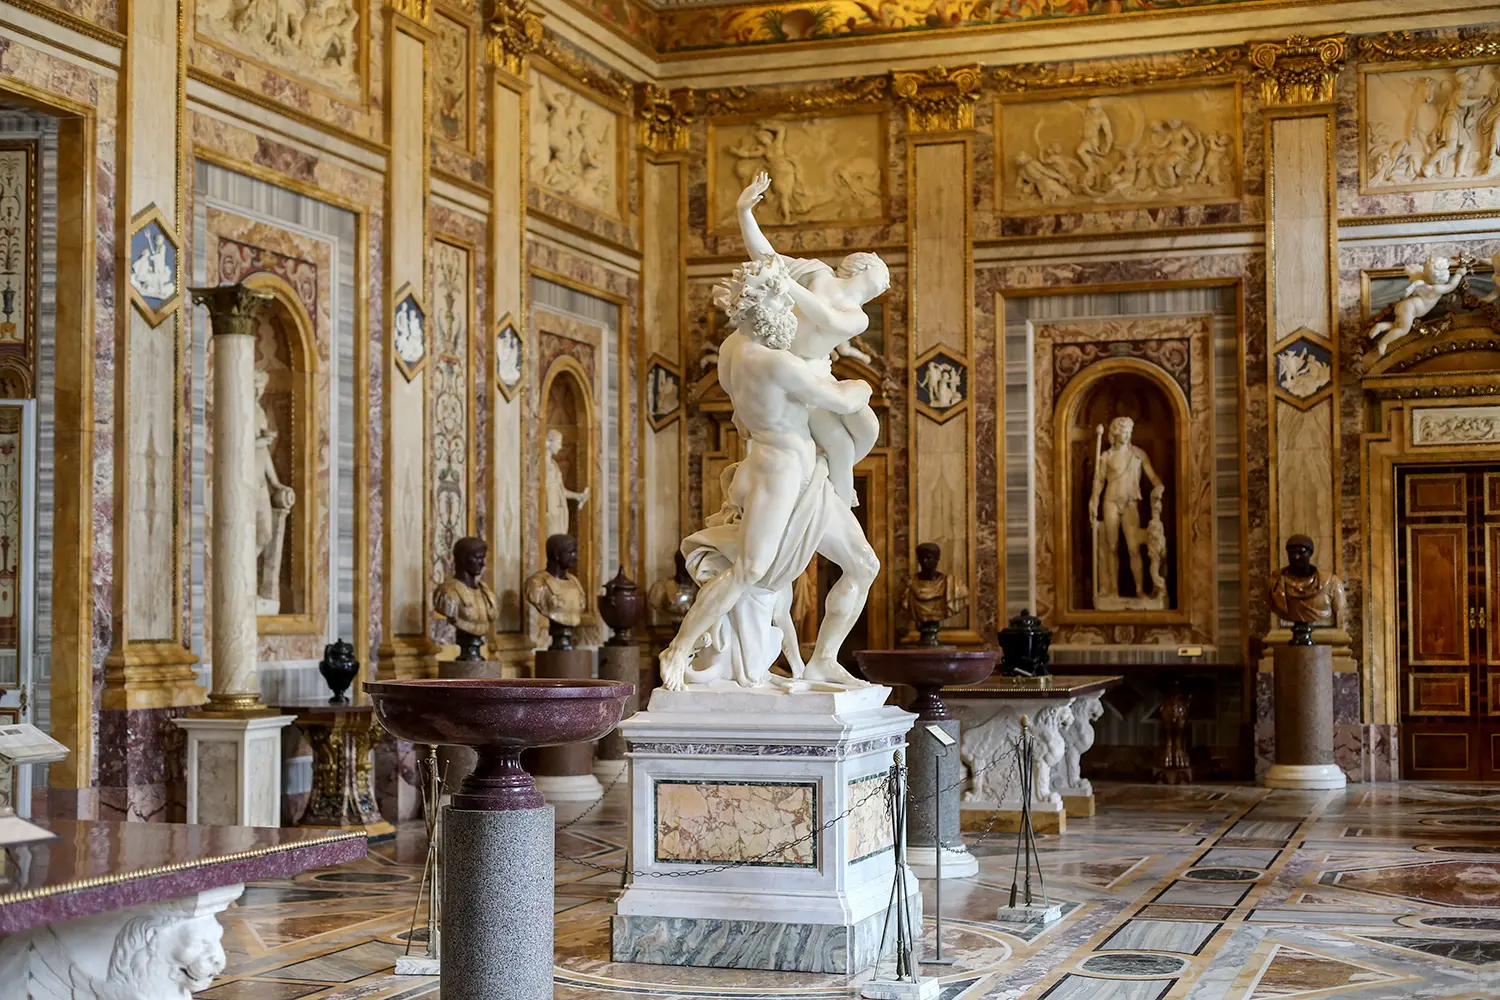 Sculpture at the Galleria Borghese, Rome, Italy